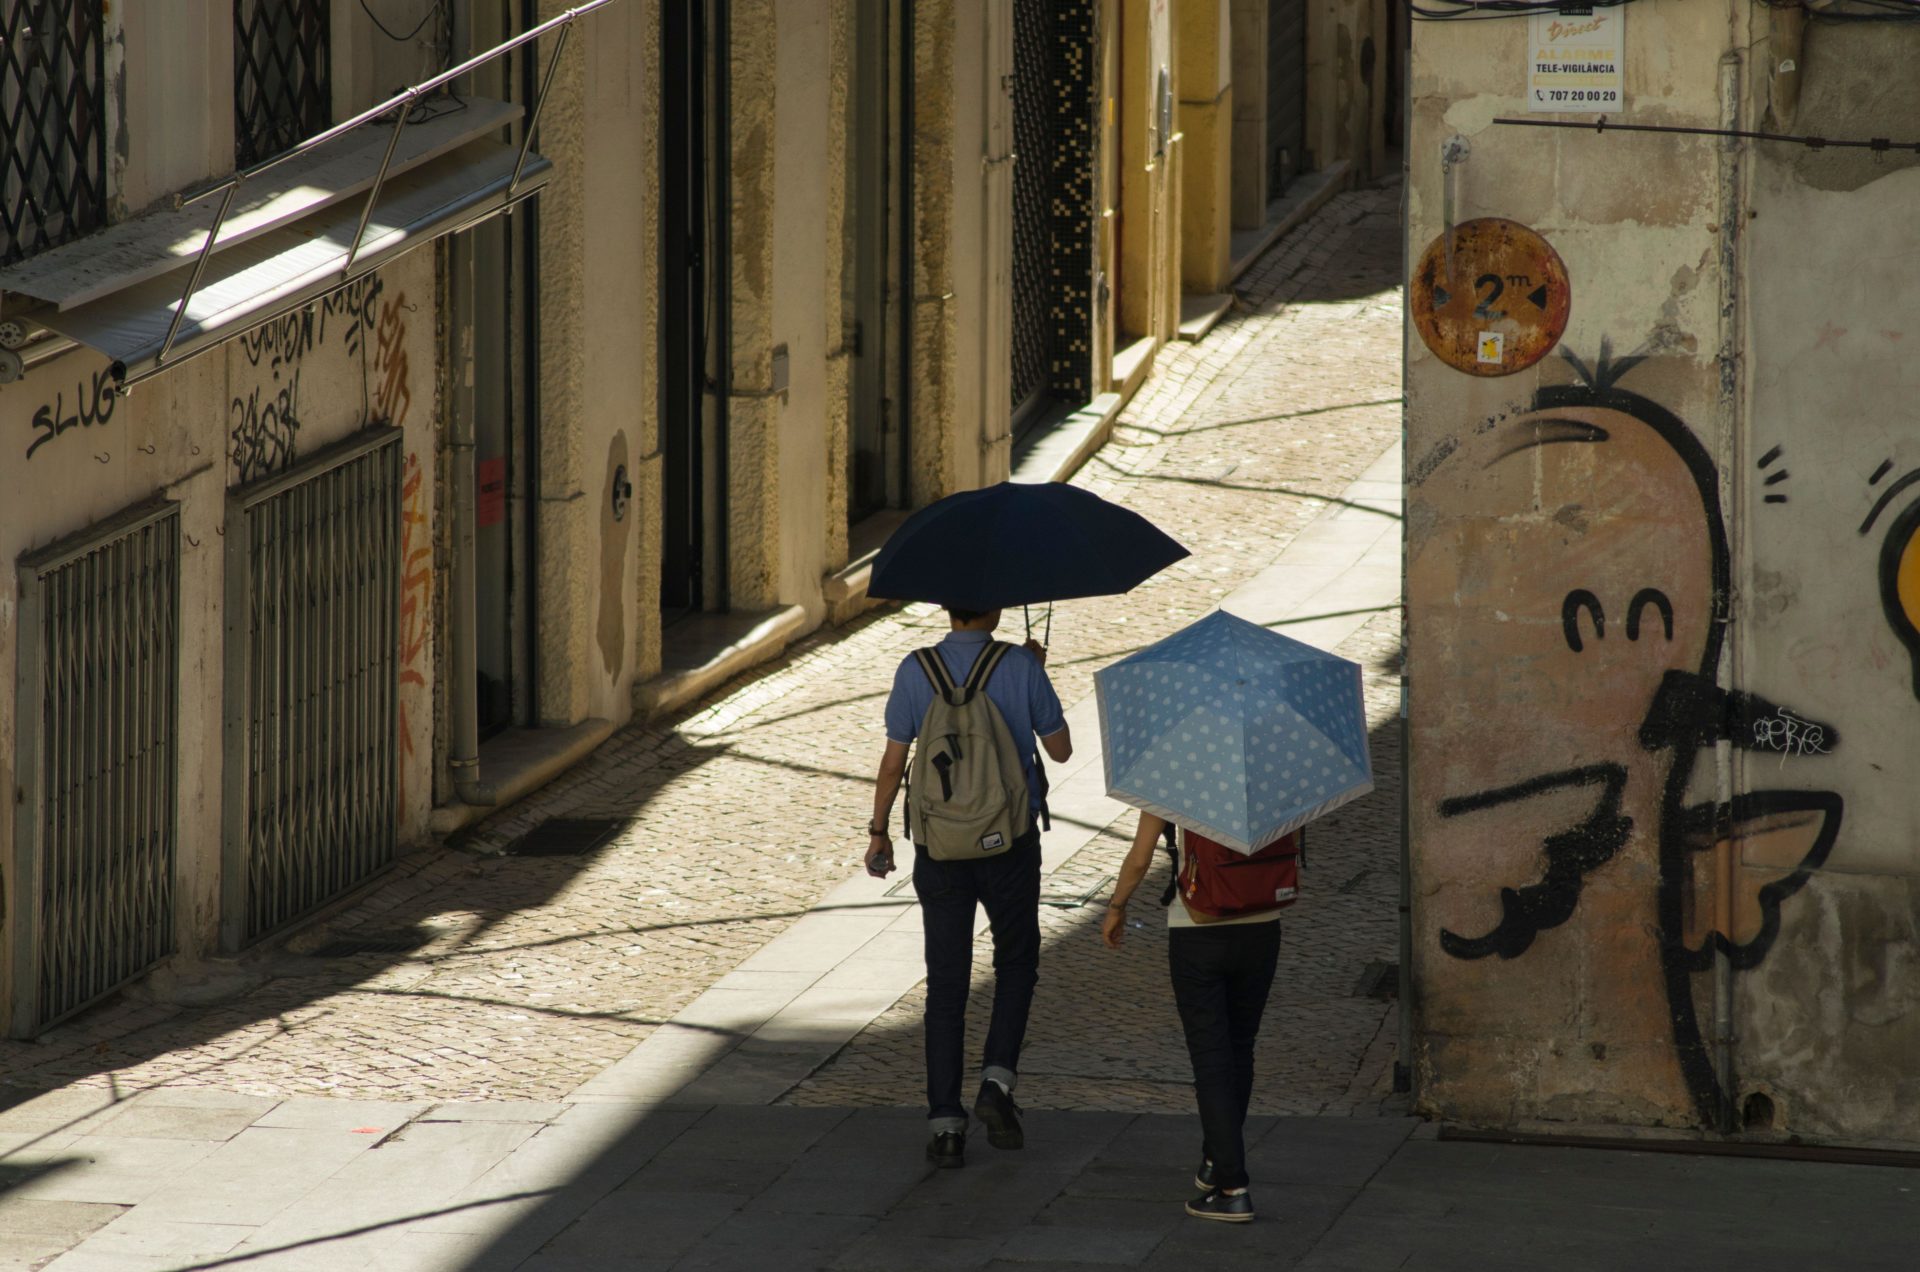 People try to keep cool during a heatwave in Coimbra Portugal, using umbrellas to find shade from the sun.